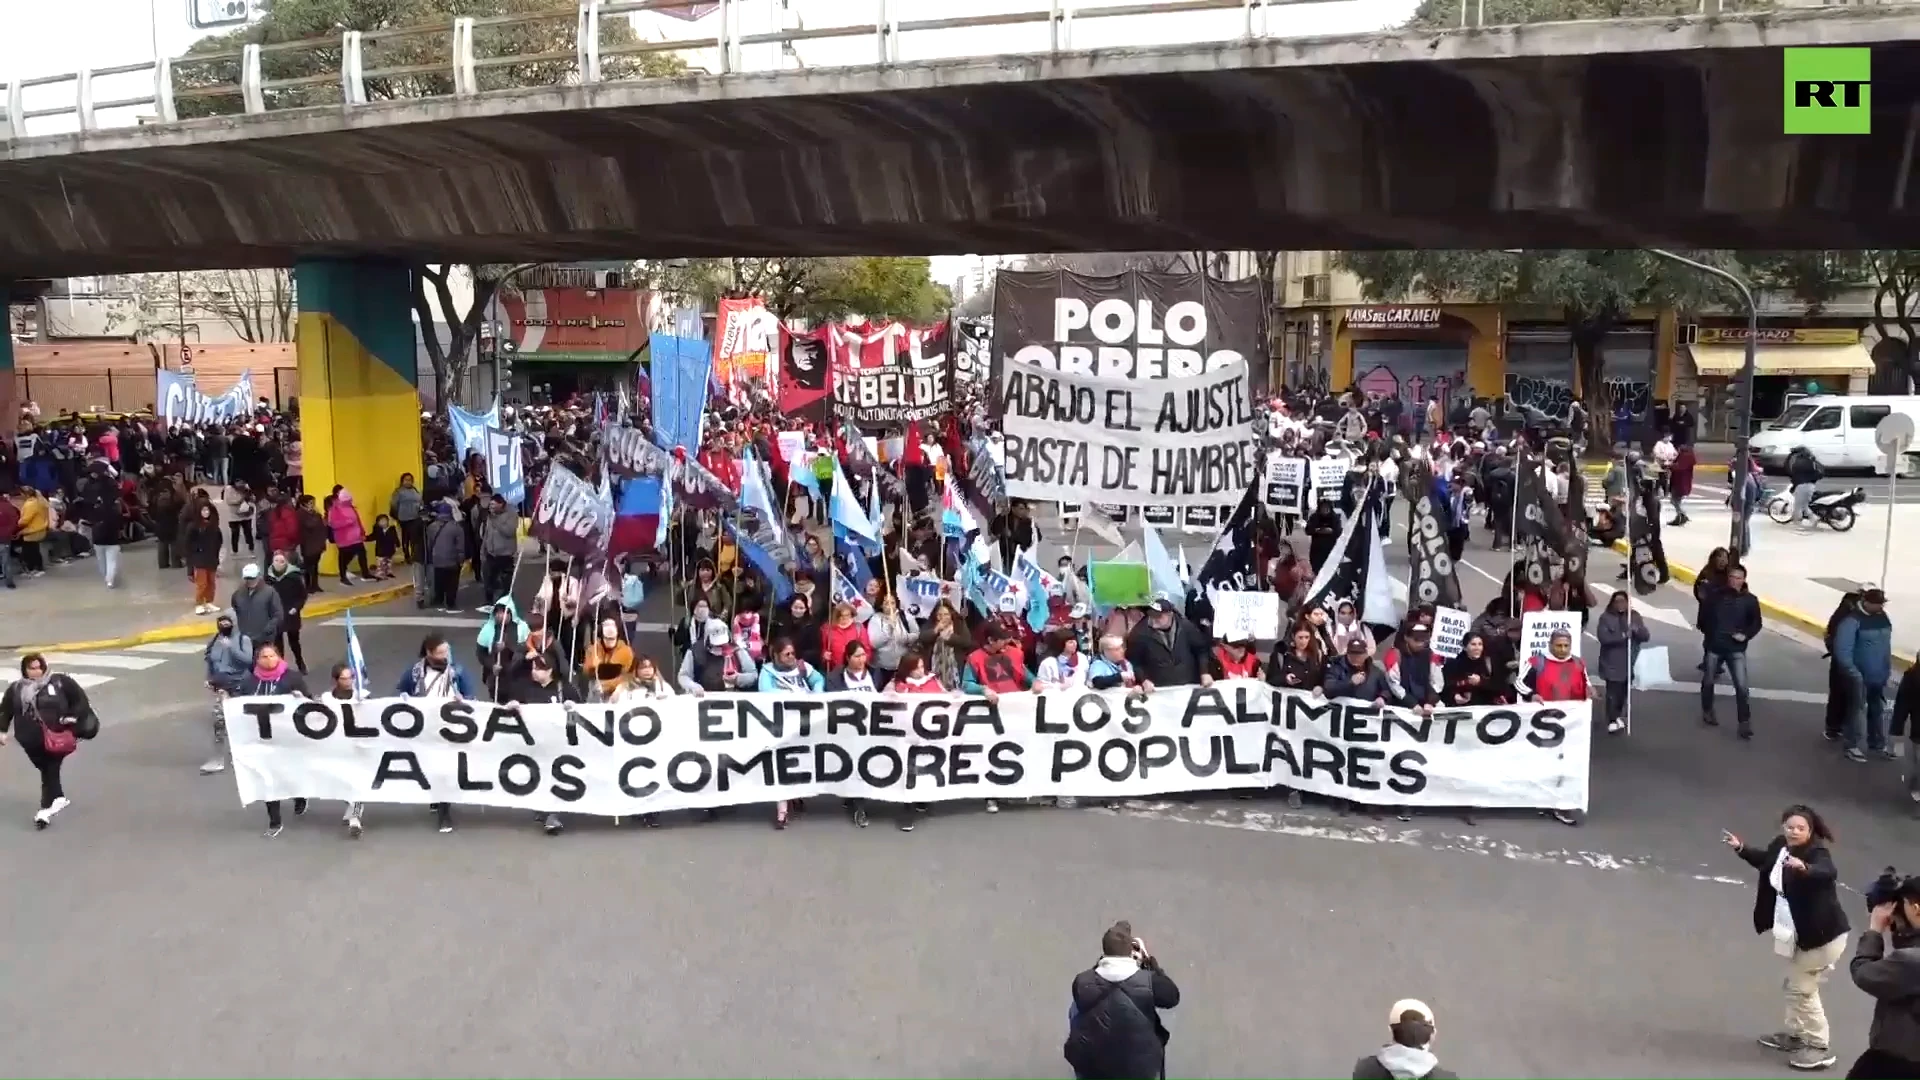 Protesters rally against rising prices and poverty in Argentina